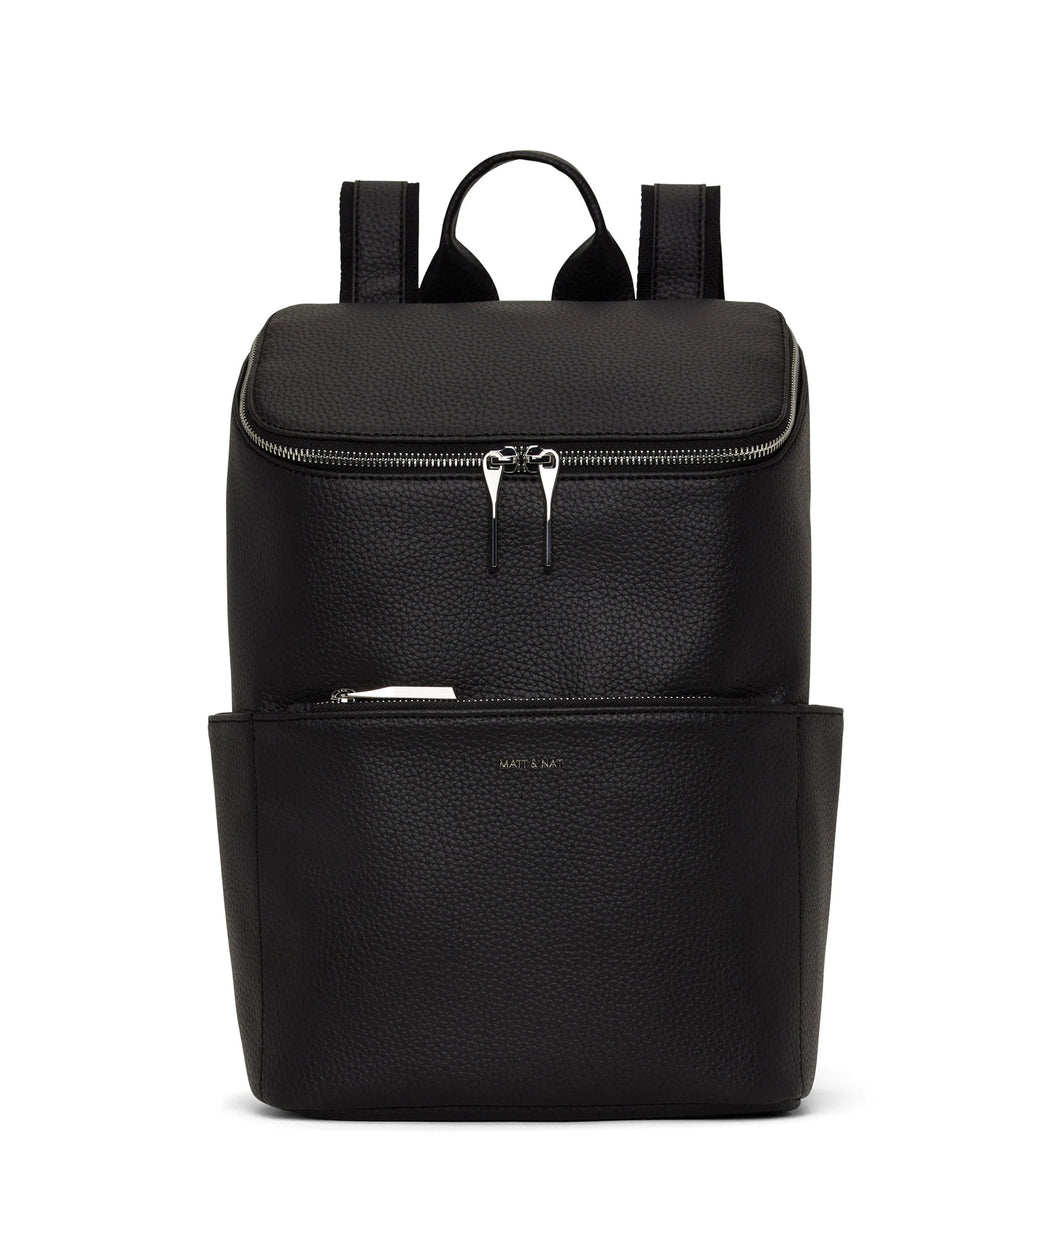 BRAVE PURITY BACKPACK IN BLACK